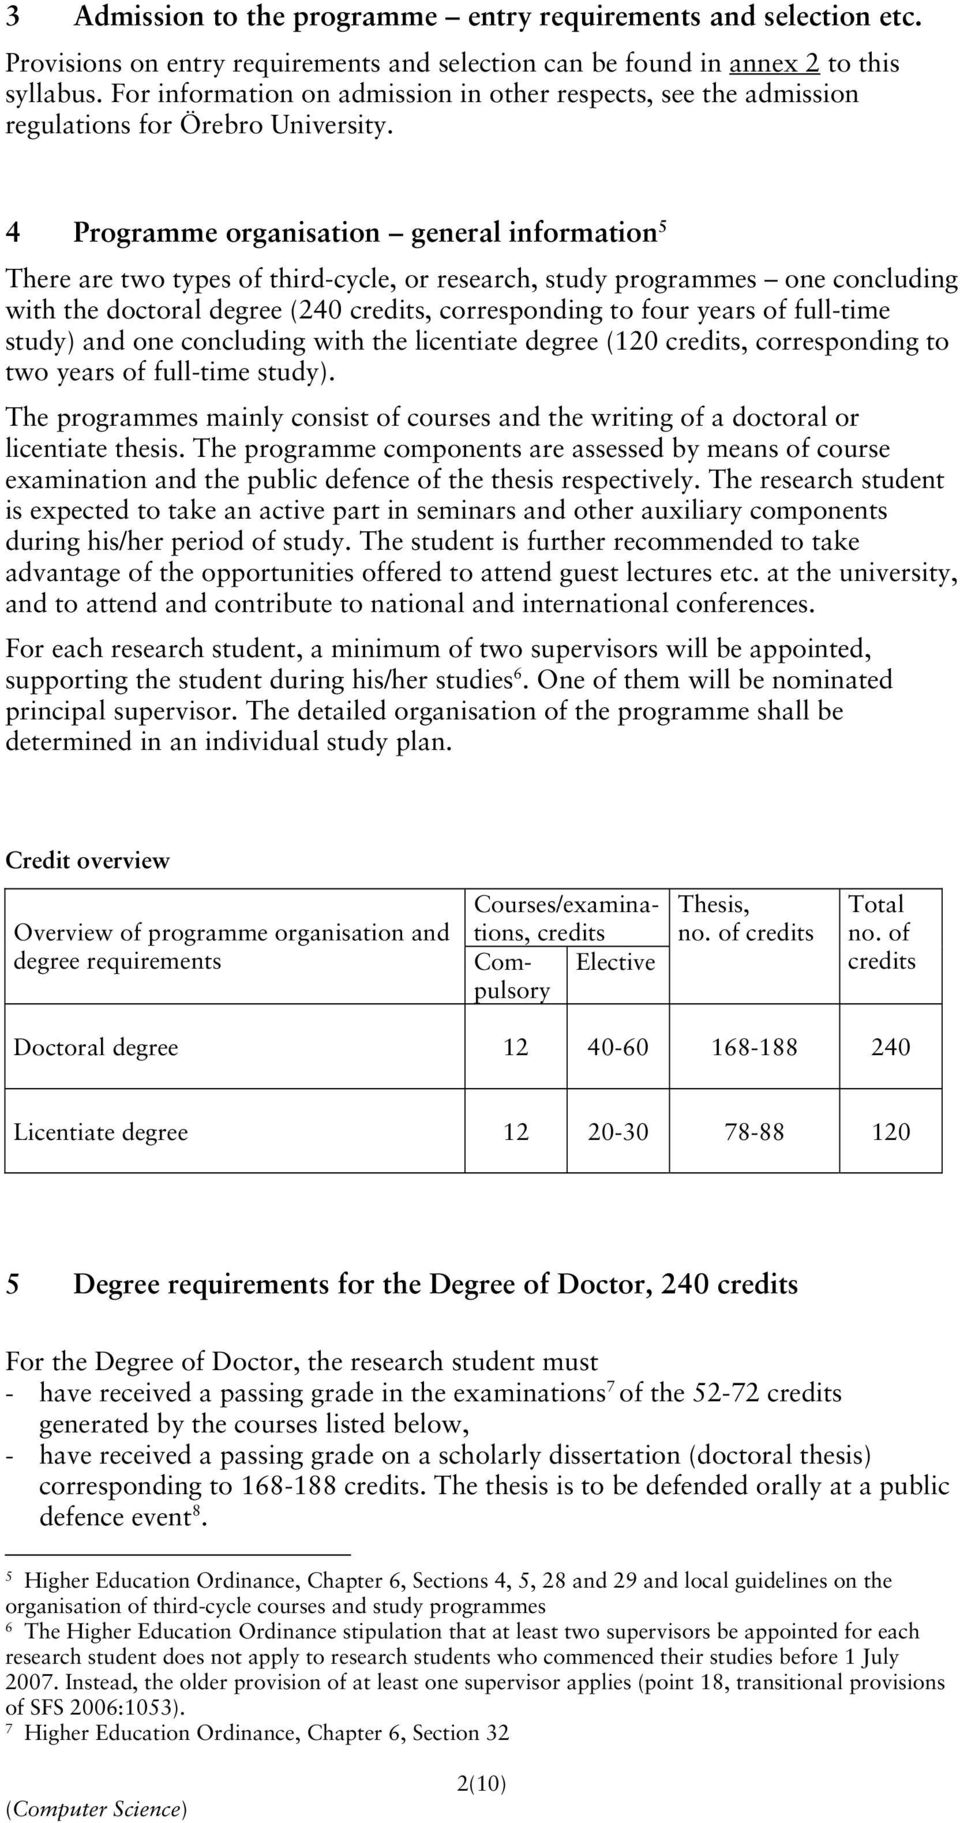 4 Programme organisation general information 5 There are two types of third-cycle, or research, study programmes one concluding with the doctoral degree (240 credits, corresponding to four years of